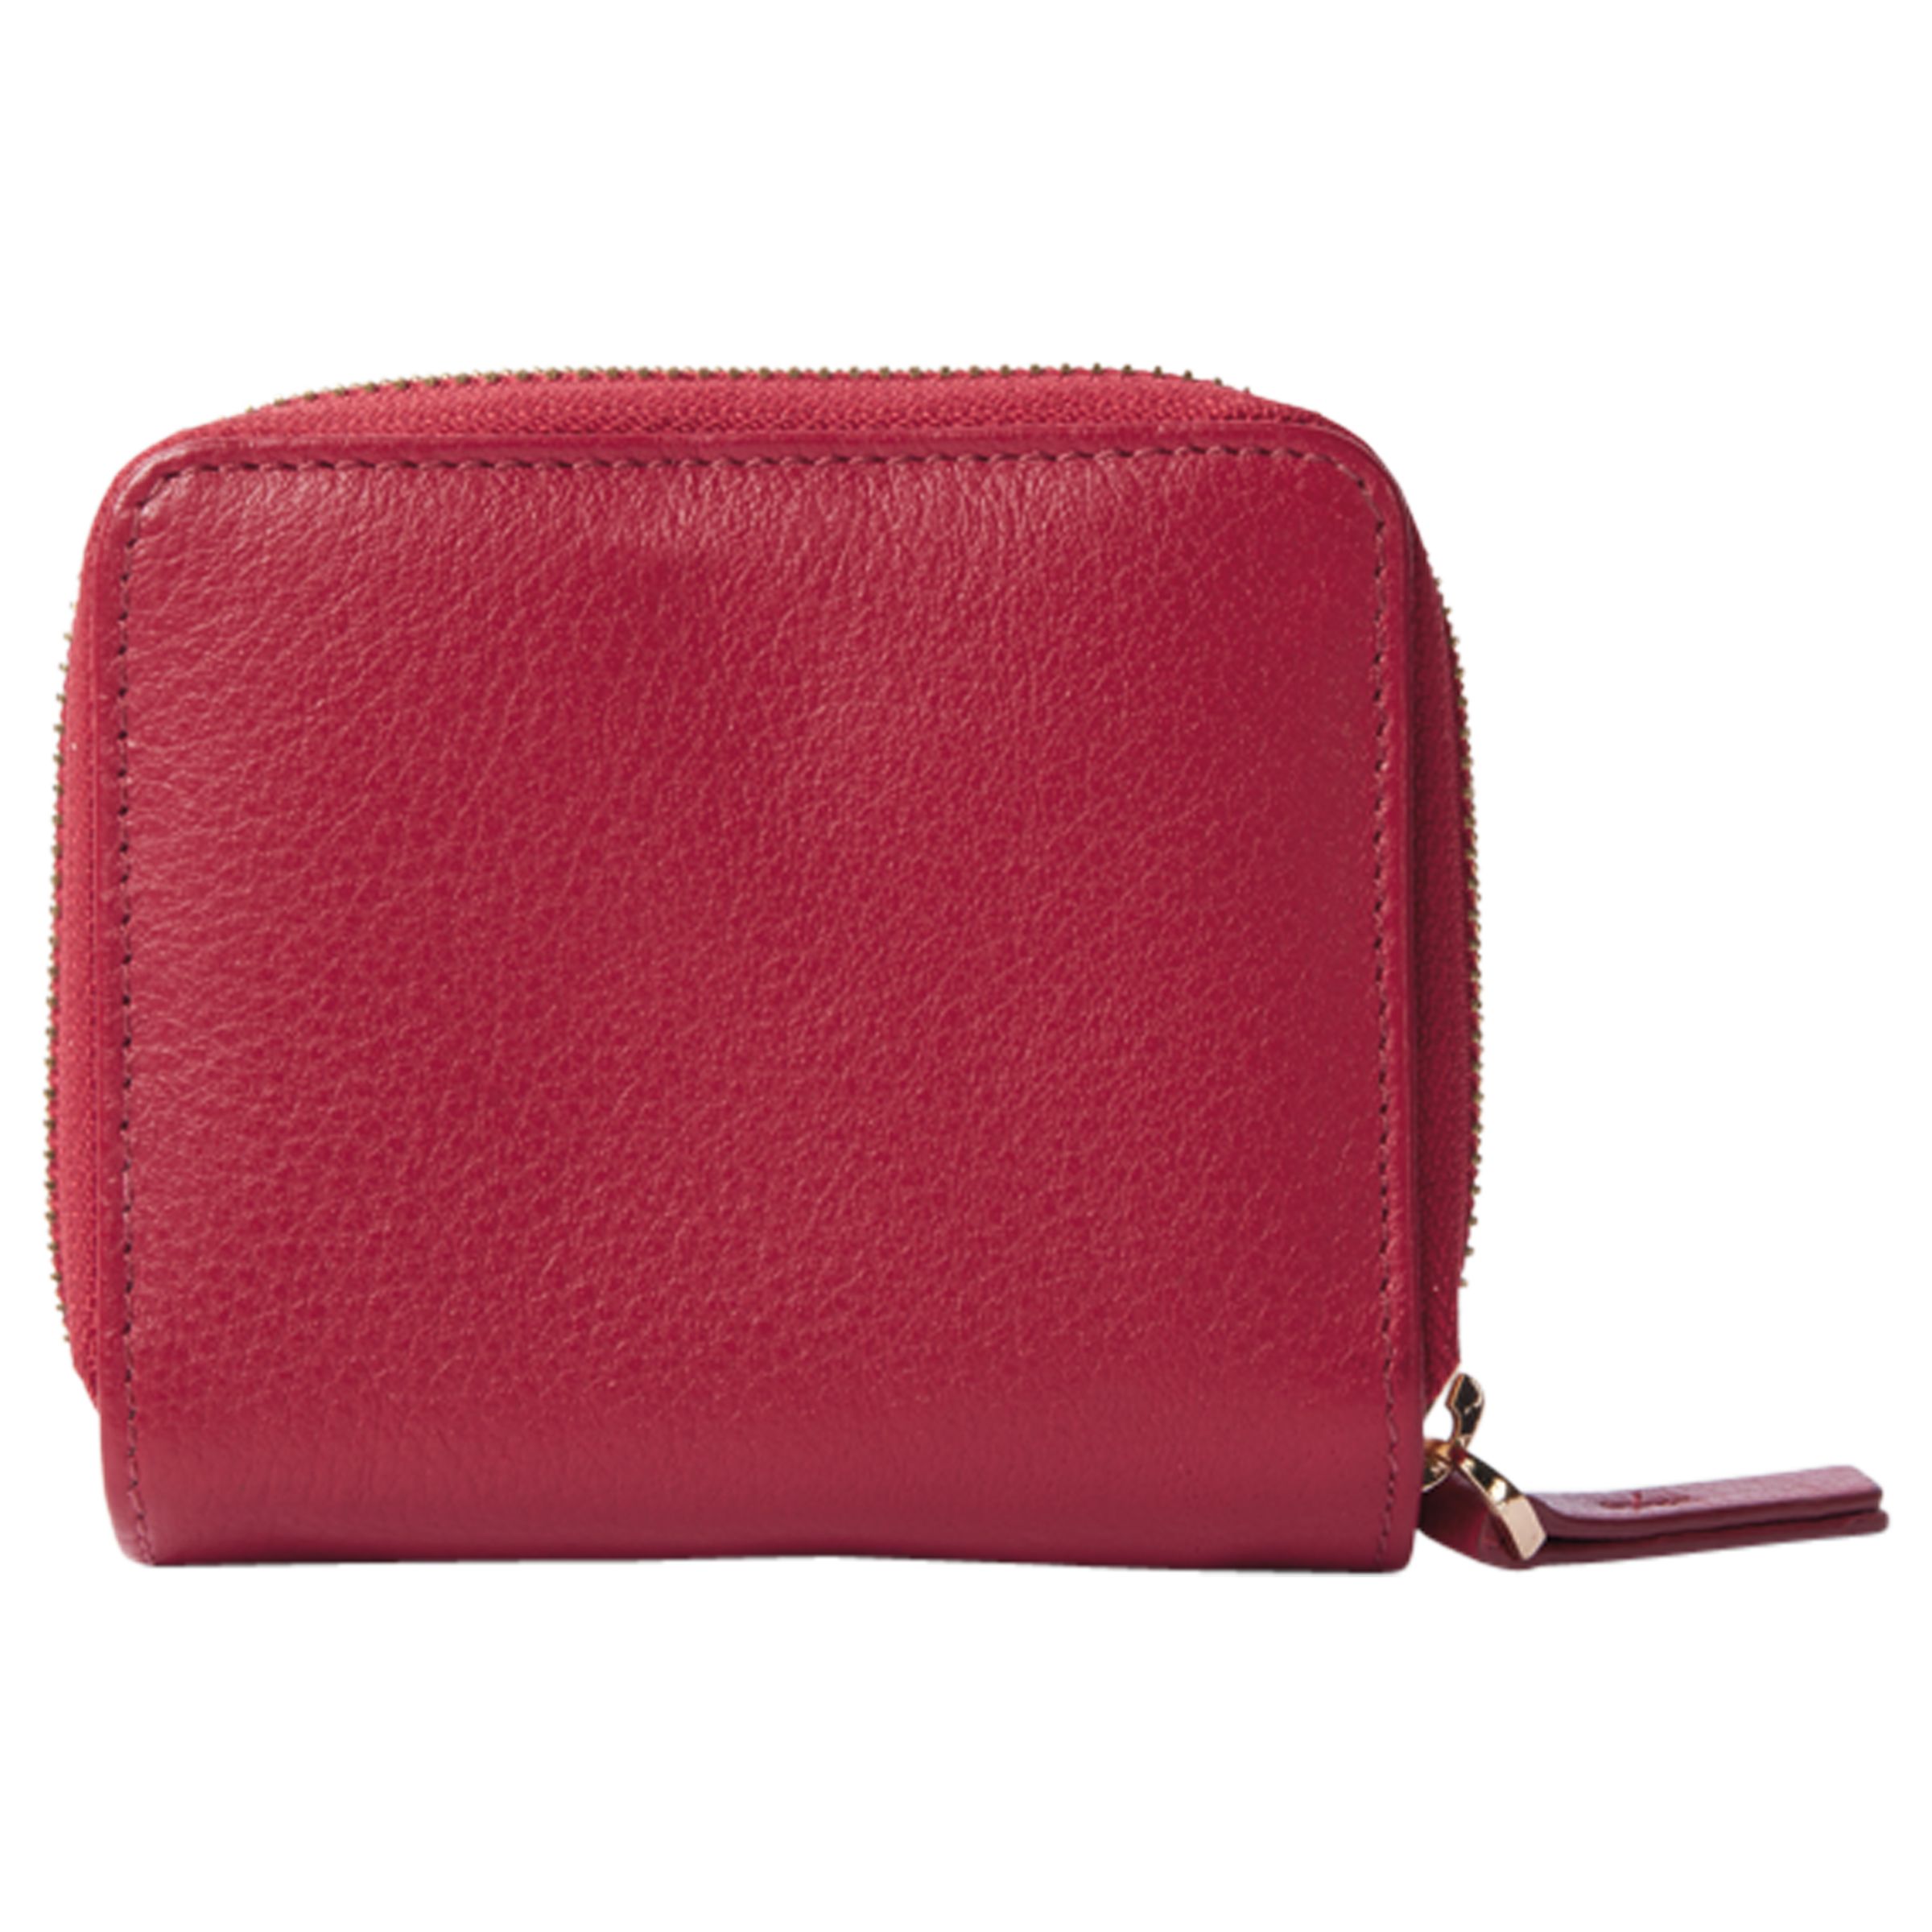 hush Melodie Leather Purse